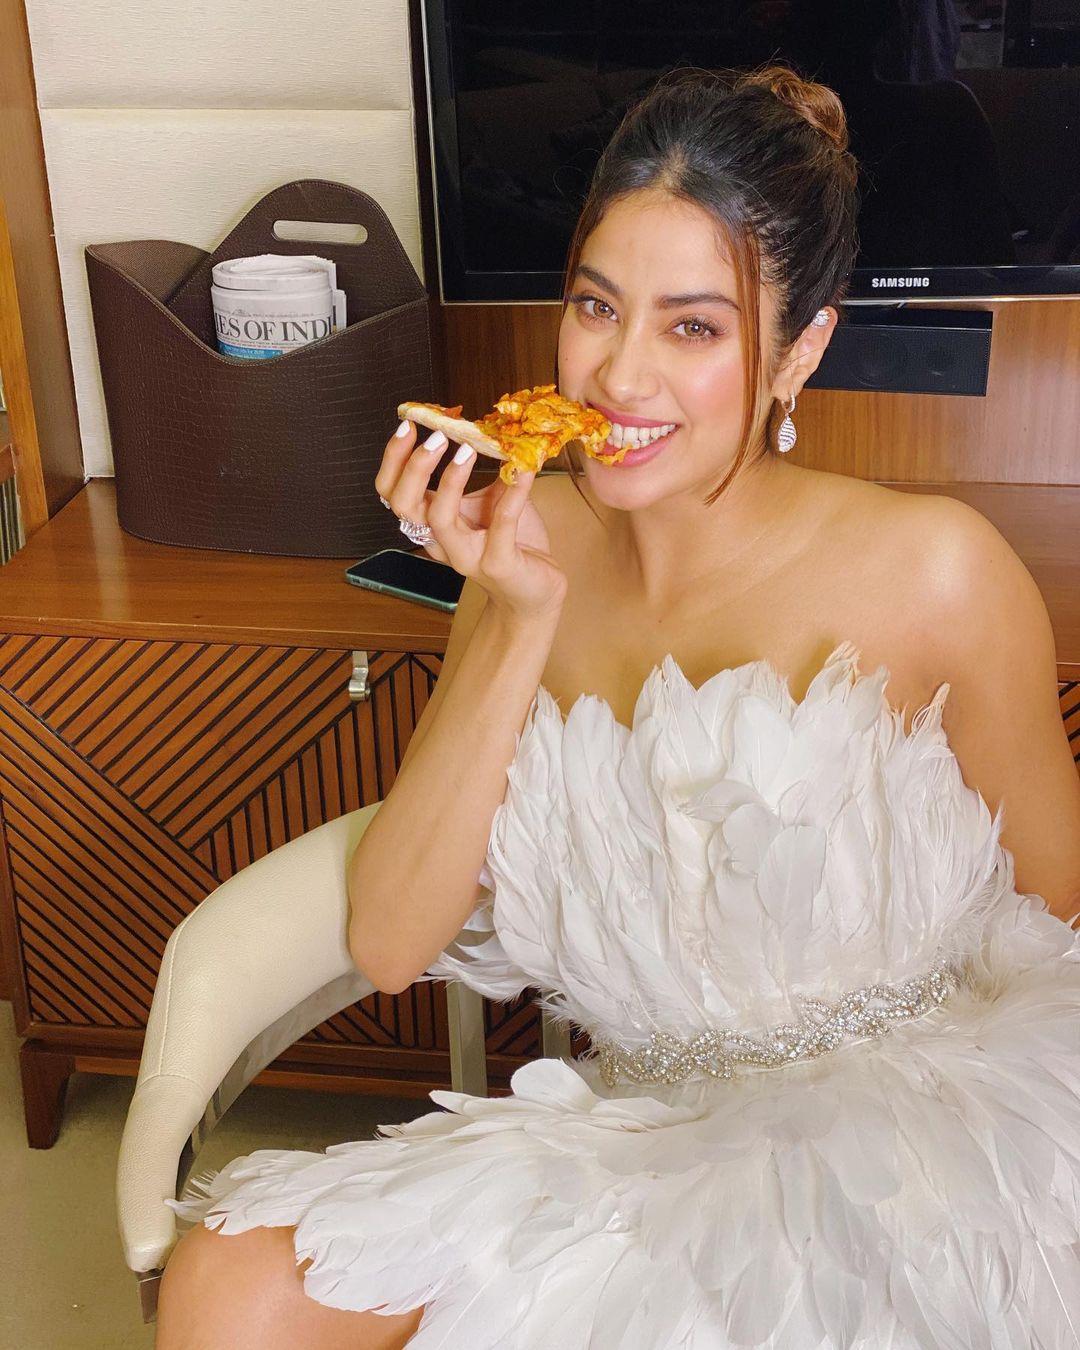 We're convinced Janhvi Kapoor looks glam at all times! Even while eating a slice of pizza. 